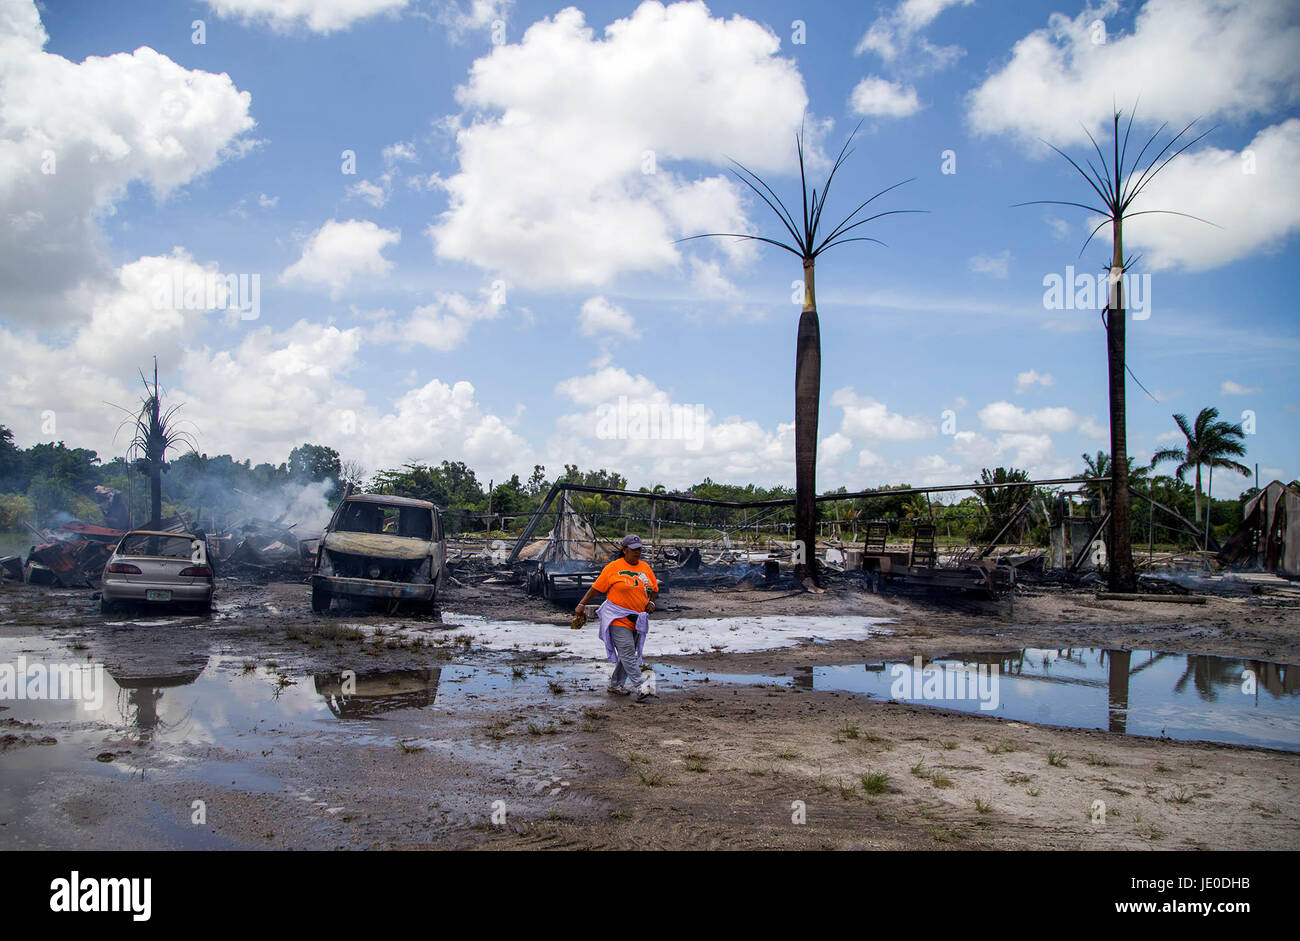 Delray Beach, Florida, USA. 22nd June, 2017. A fire destroyed a wood packing house leased by Otero Nurseries Thursday morning. Two vehicles and two trailers were also destroyed by the fire in Delray Beach, Florida on June 22, 2017. Rosita Caudillo, who works for Otero Nurseries lost her drivers license and social security card and key fob to another car in the fire. The car was not insured as she was getting ready to sell it. The fire was possibly was caused by a torch being used to dismantle some green houses. Credit: Allen Eyestone/The Palm Beach Post/ZUMA Wire/Alamy Live News Stock Photo